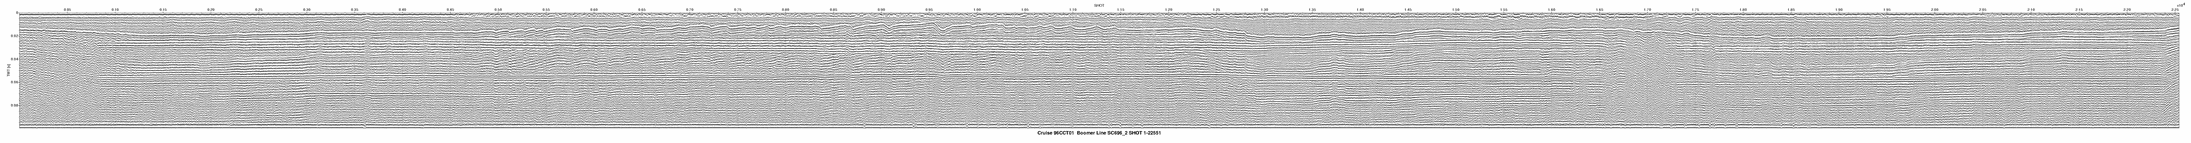 SC696_2 seismic profile thumbnail image with link to full size image